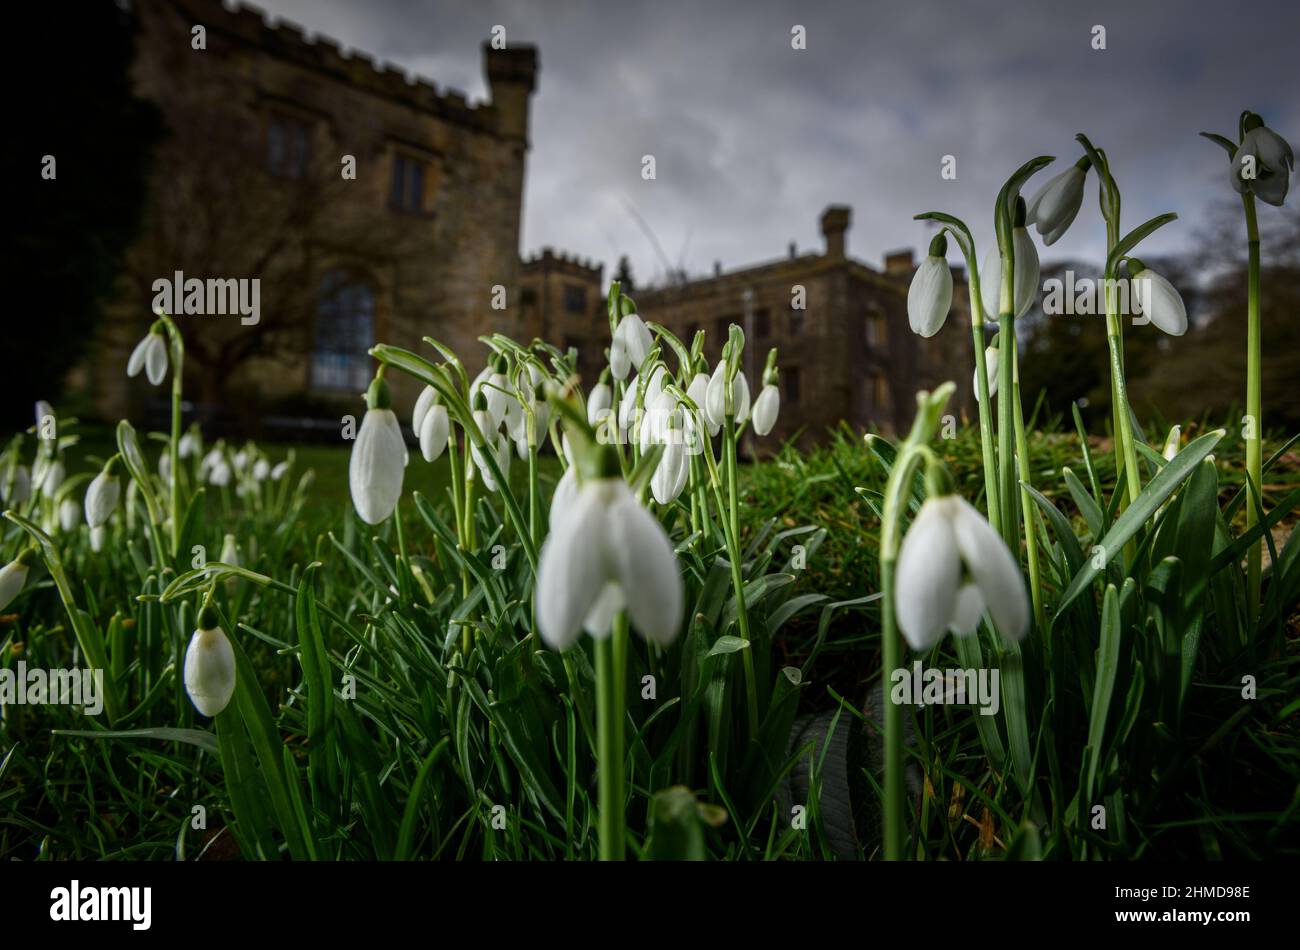 Burnley, Lancashire, UK, Wednesday February 09, 2022. A crop of Snowdrops in bloom in front of the historic Towneley Hall in Burnley, Lancashire. Credit: Paul Heyes/Alamy News Live Stock Photo